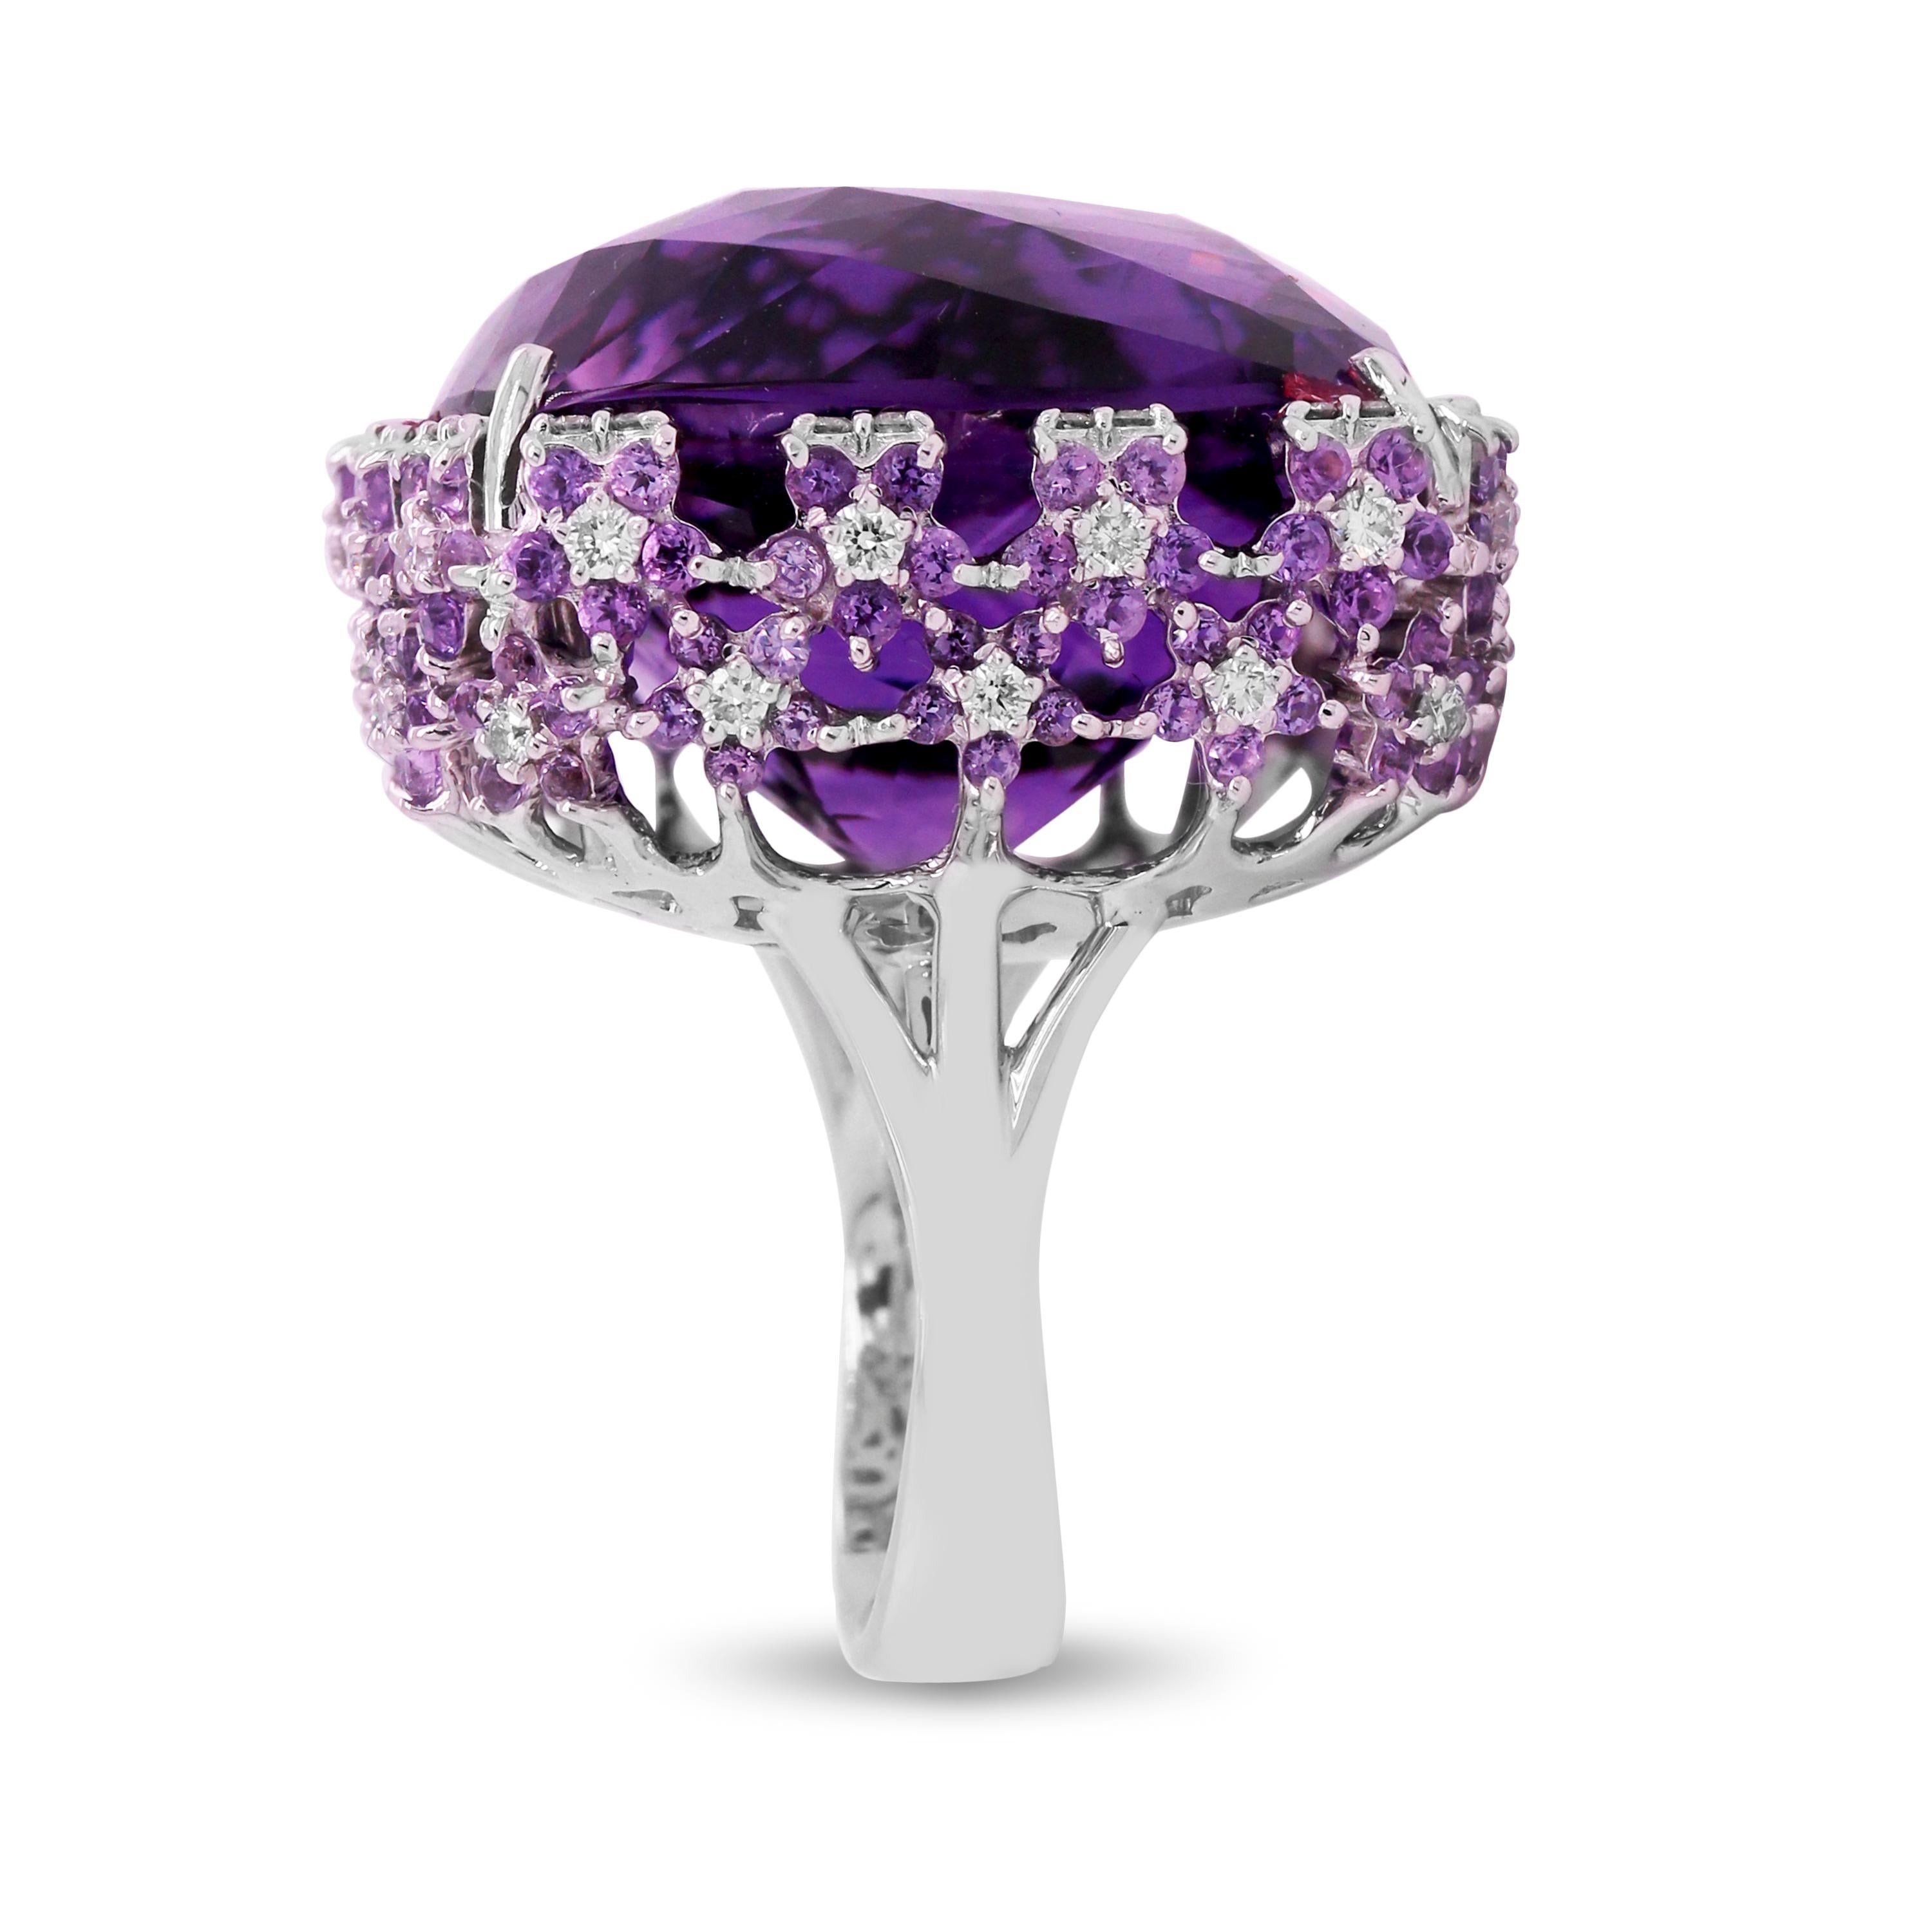 Contemporary Roberto Coin 73.44 Carat Amethyst White Gold Diamond Large Cocktail Ring For Sale